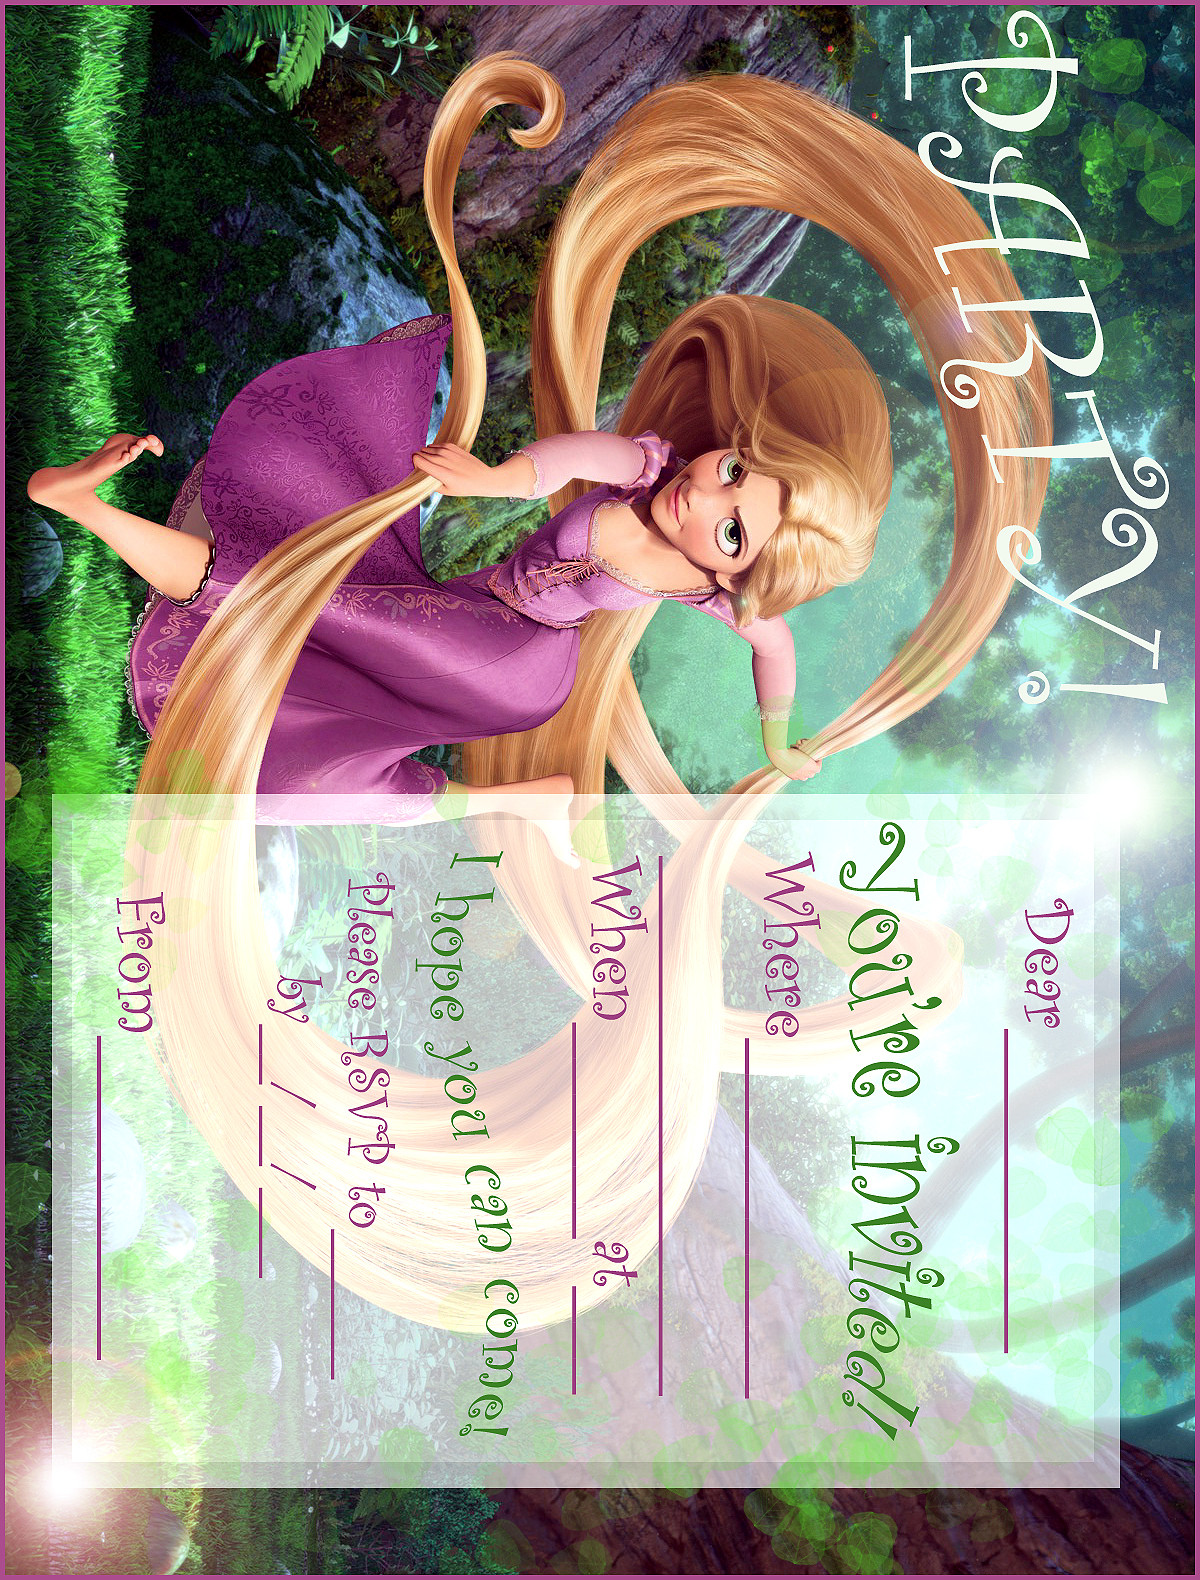 Tangled Birthday Invitations
 FREE PRINTABLE RAPUNZEL PARTY INVITATION FROM TANGLED